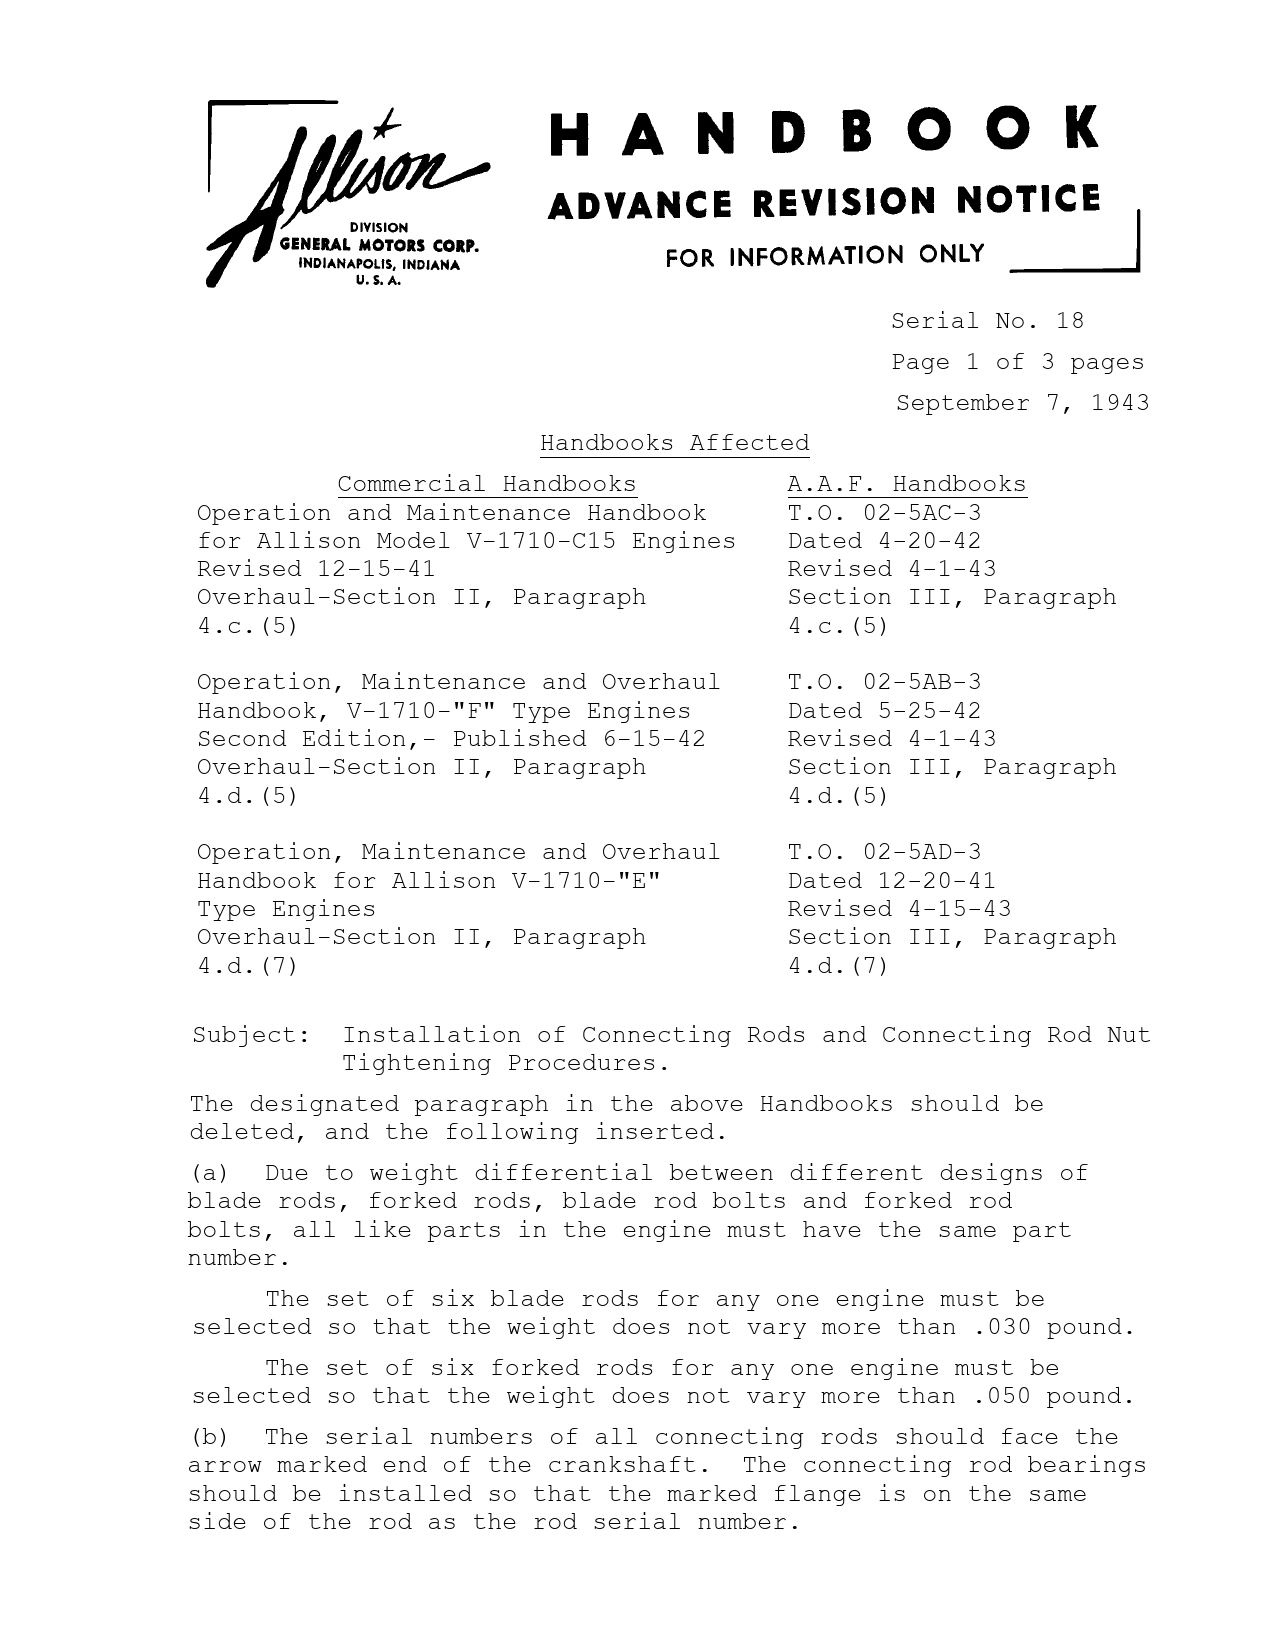 Sample page 1 from AirCorps Library document: Installation of Connecting Rods and Connecting Rod Nut Tightening Procedure